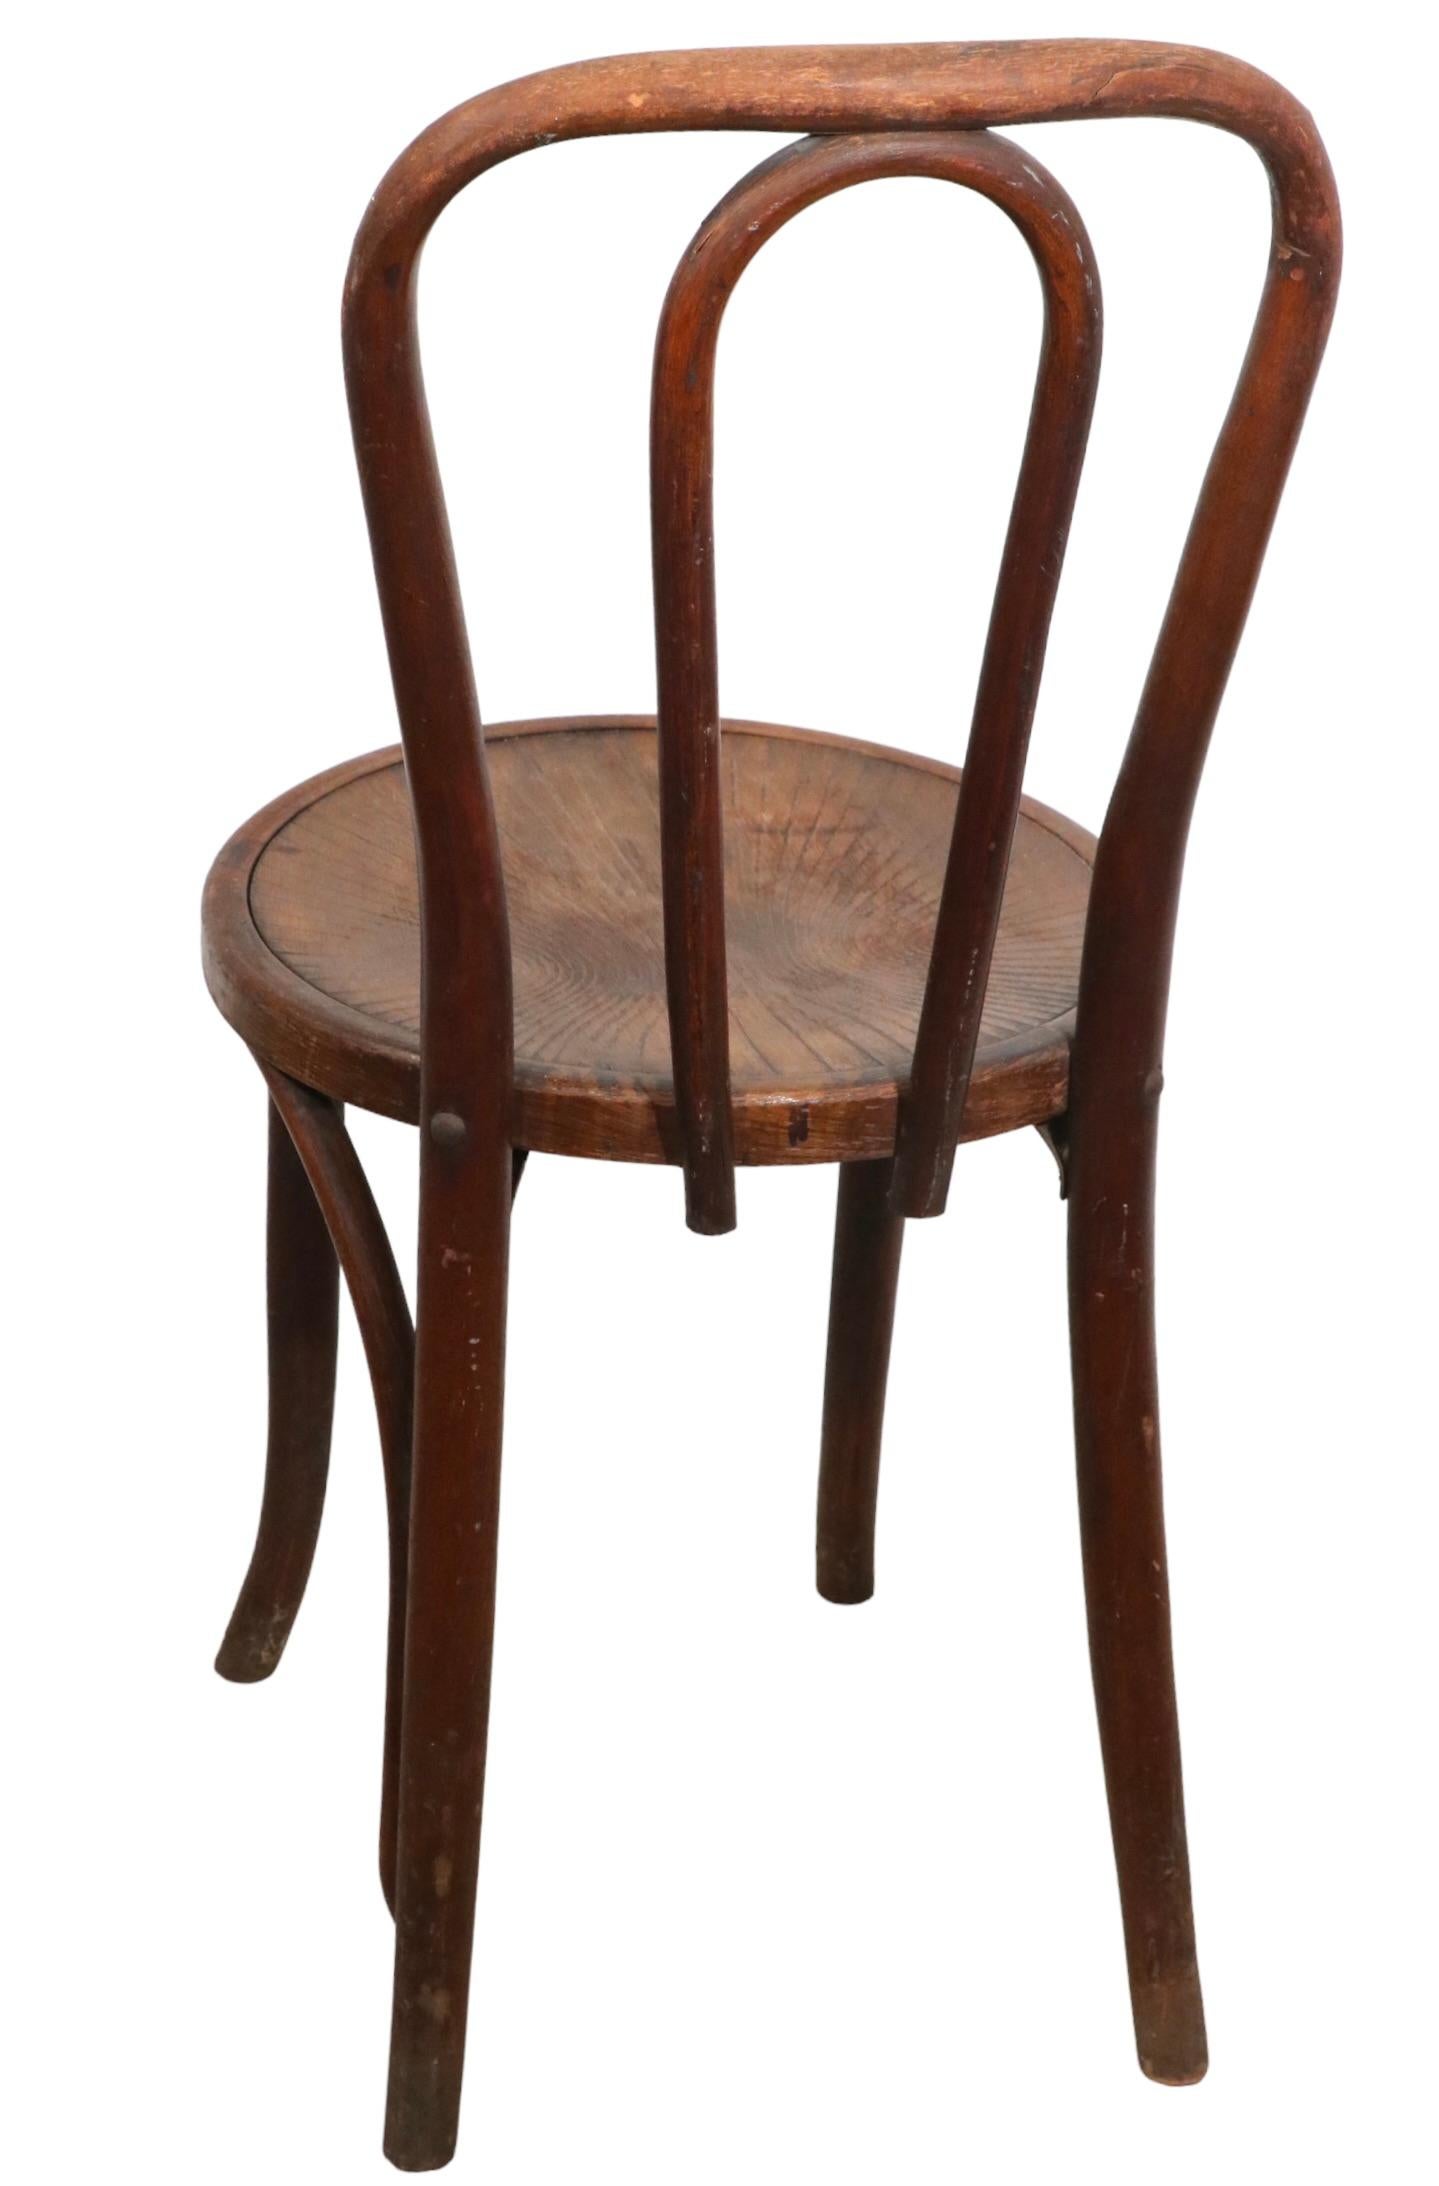 Vienna Secession  Bentwood Side Desk Cafe Dining Chair Possibly Thonet , J J Kohn, Fischel